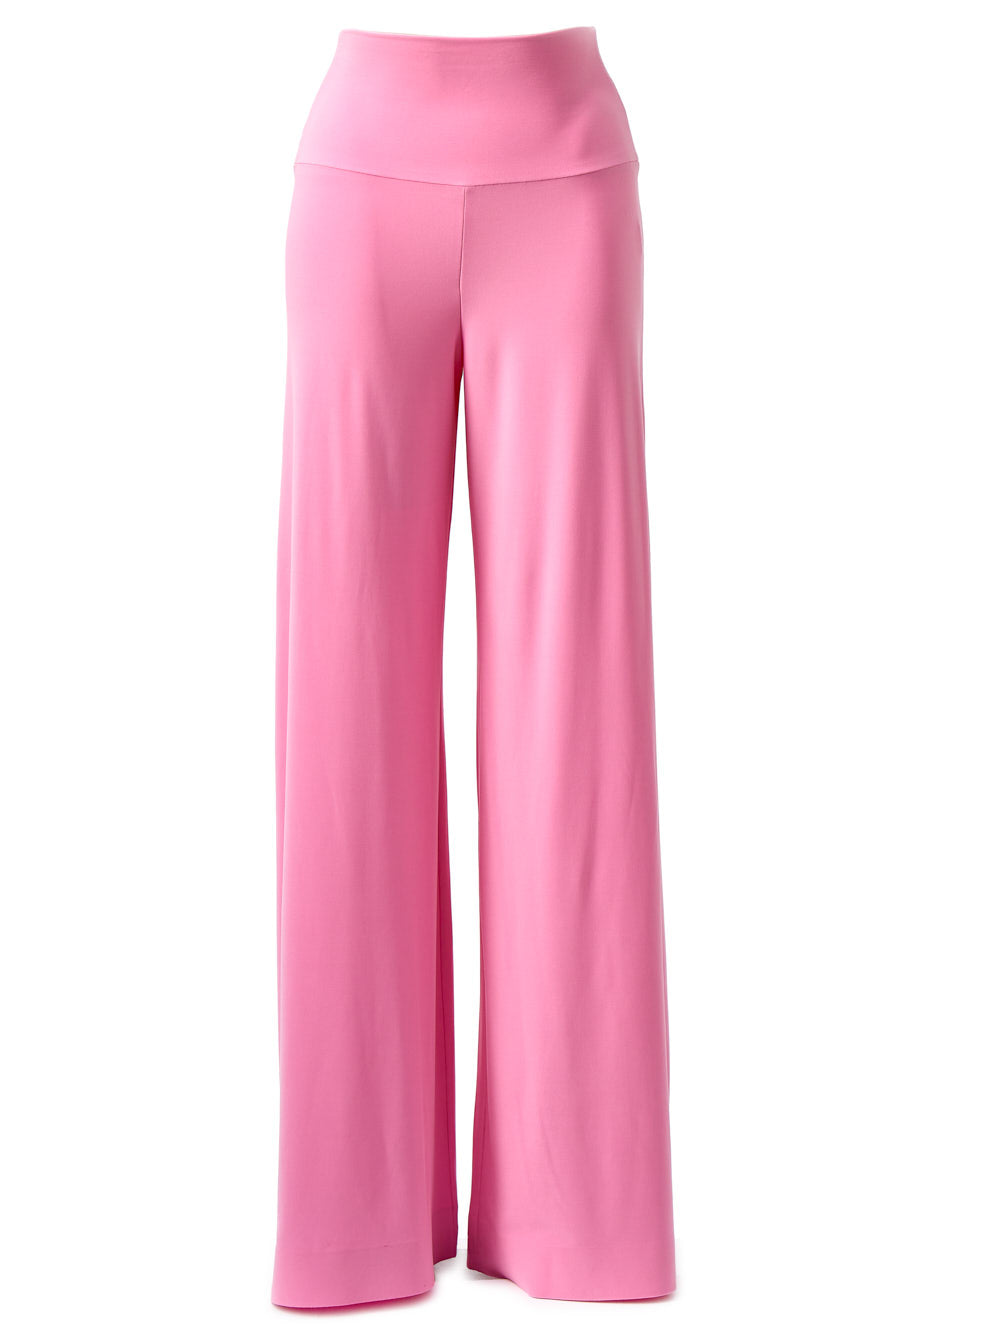 Elephant pants in candy Pink